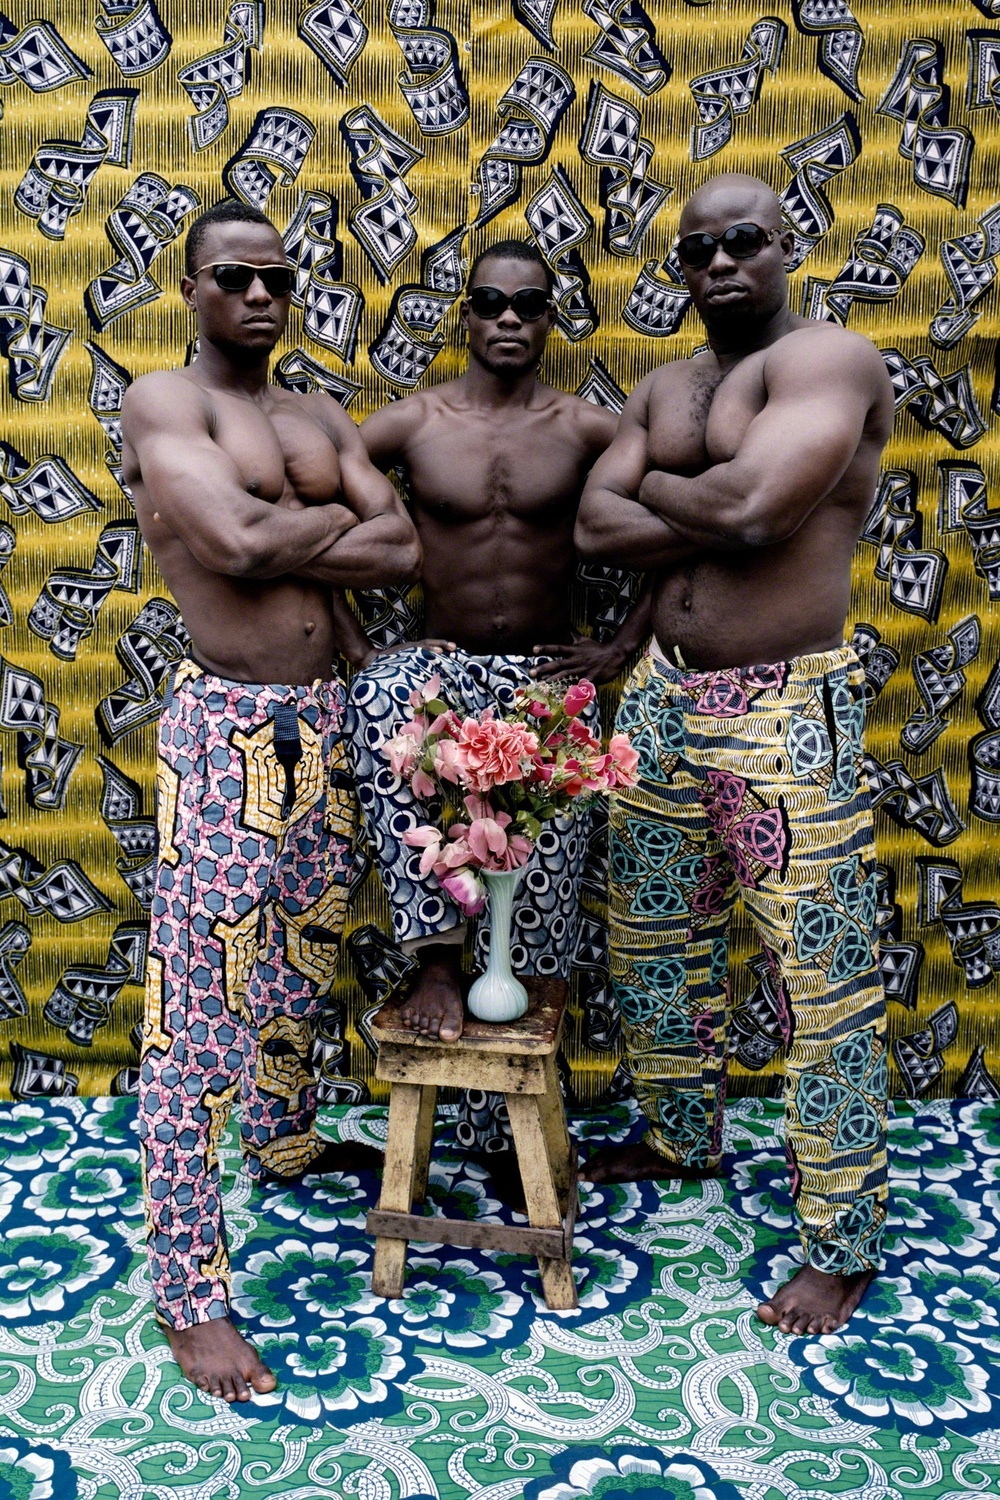 Three black men in sunglasses pose around a vase holding pink flowers. They are in front of a gold, black, and white backdrop and are standing on a floral fabric.